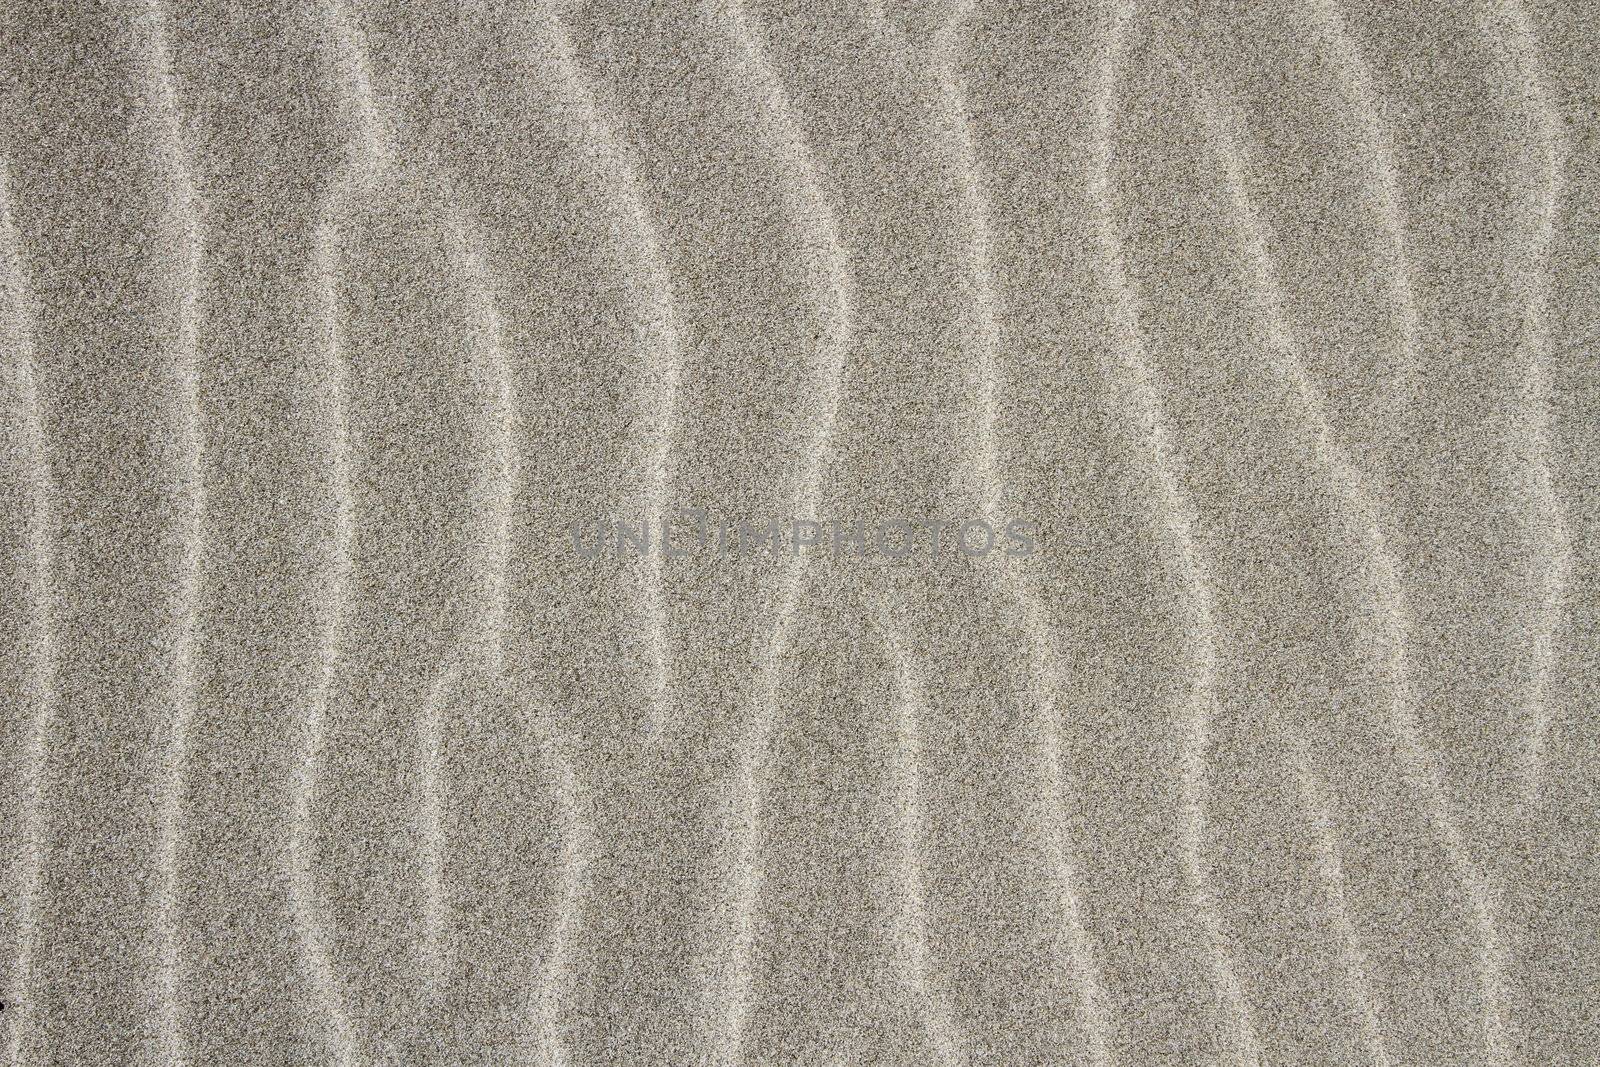 Close up of black and brown sand waves